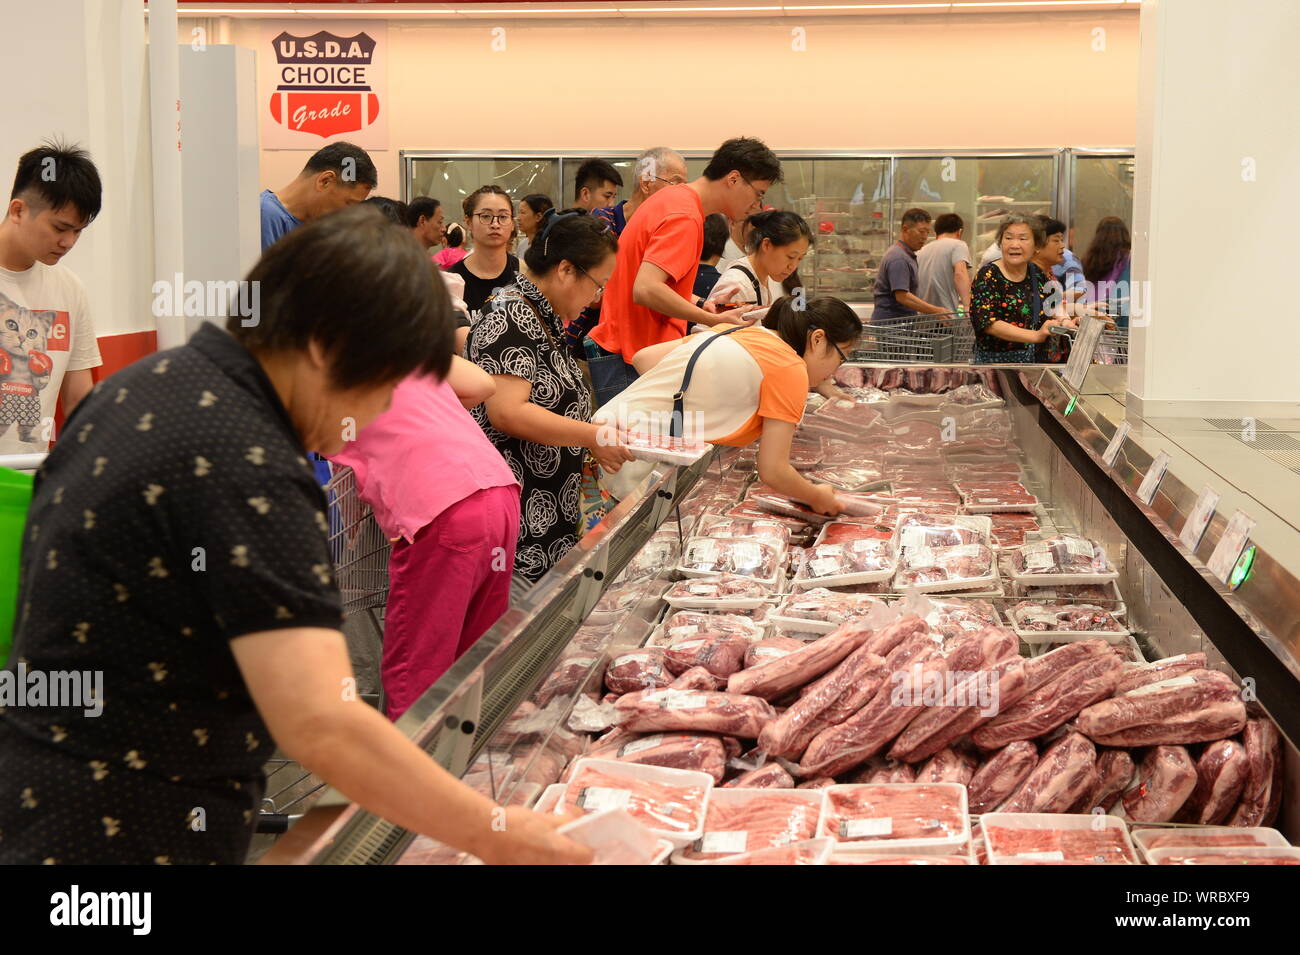 Chinese shoppers buy beef and other meat products at the Costco store in Shanghai, China on August 29th, 2019.   U.S. retailing chain giant Costco ann Stock Photo